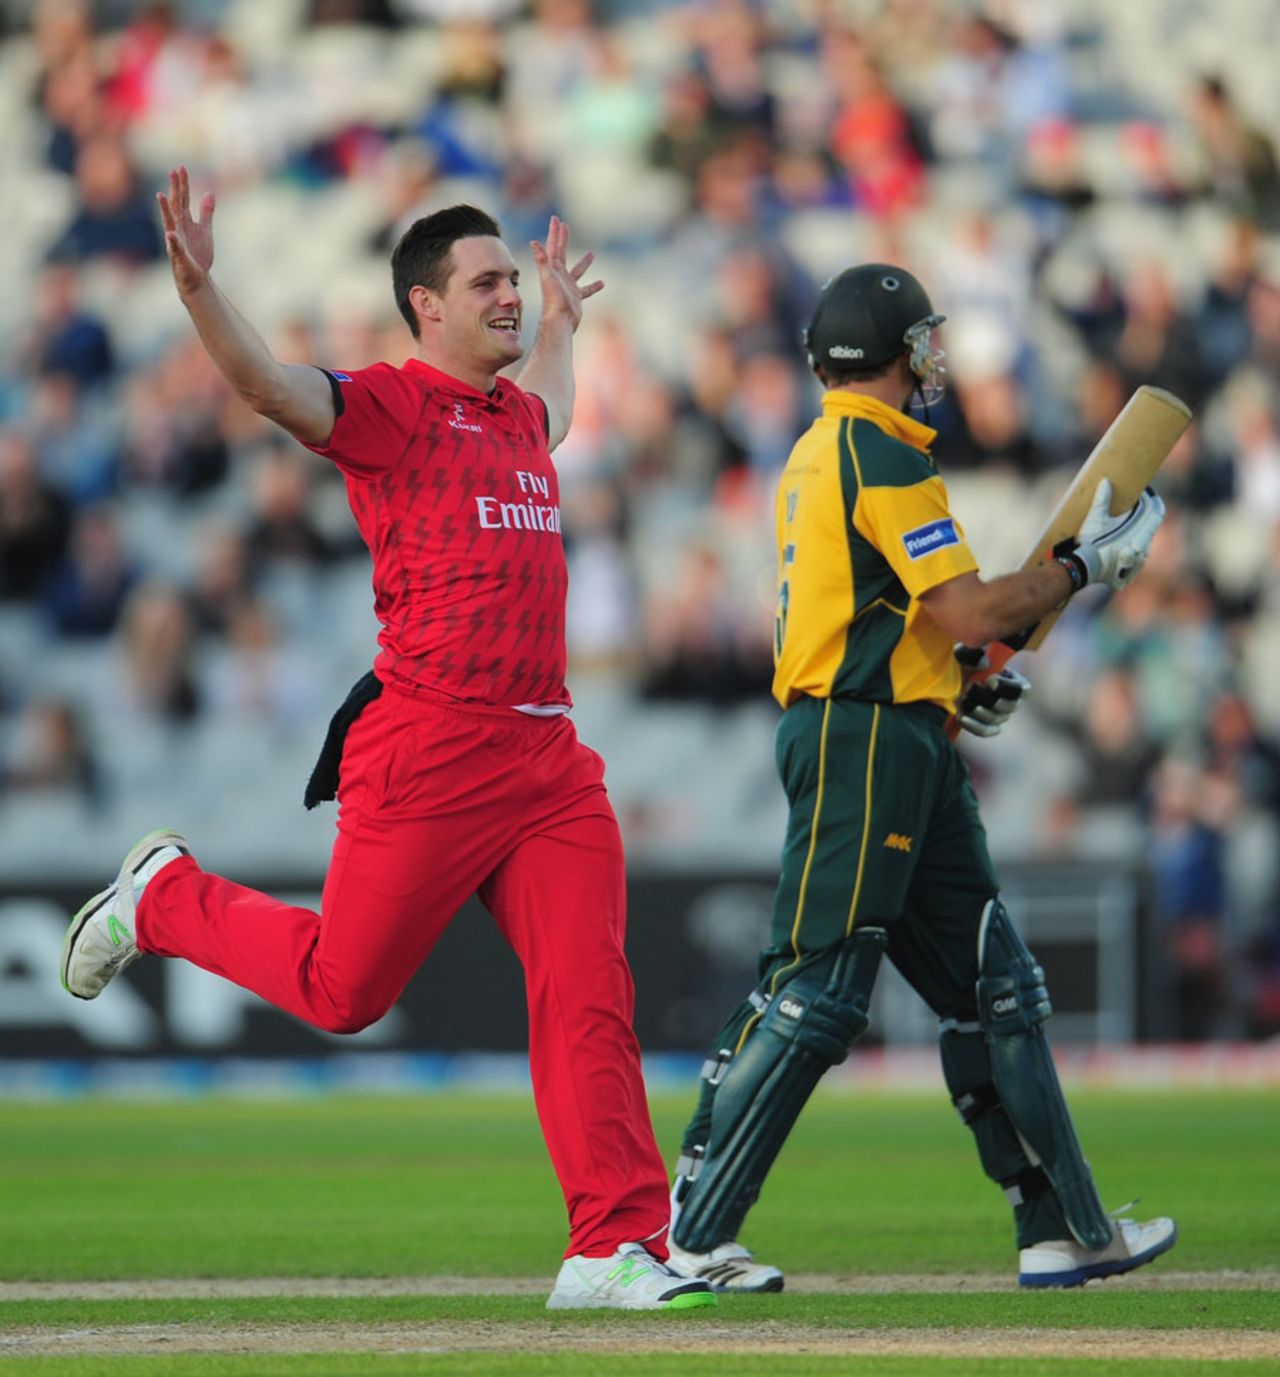 Mitchell McClenaghan celebrates one of his five wickets, Lancashire v Nottinghamshire, FLt20 North Group, Old Trafford, July 1, 2013